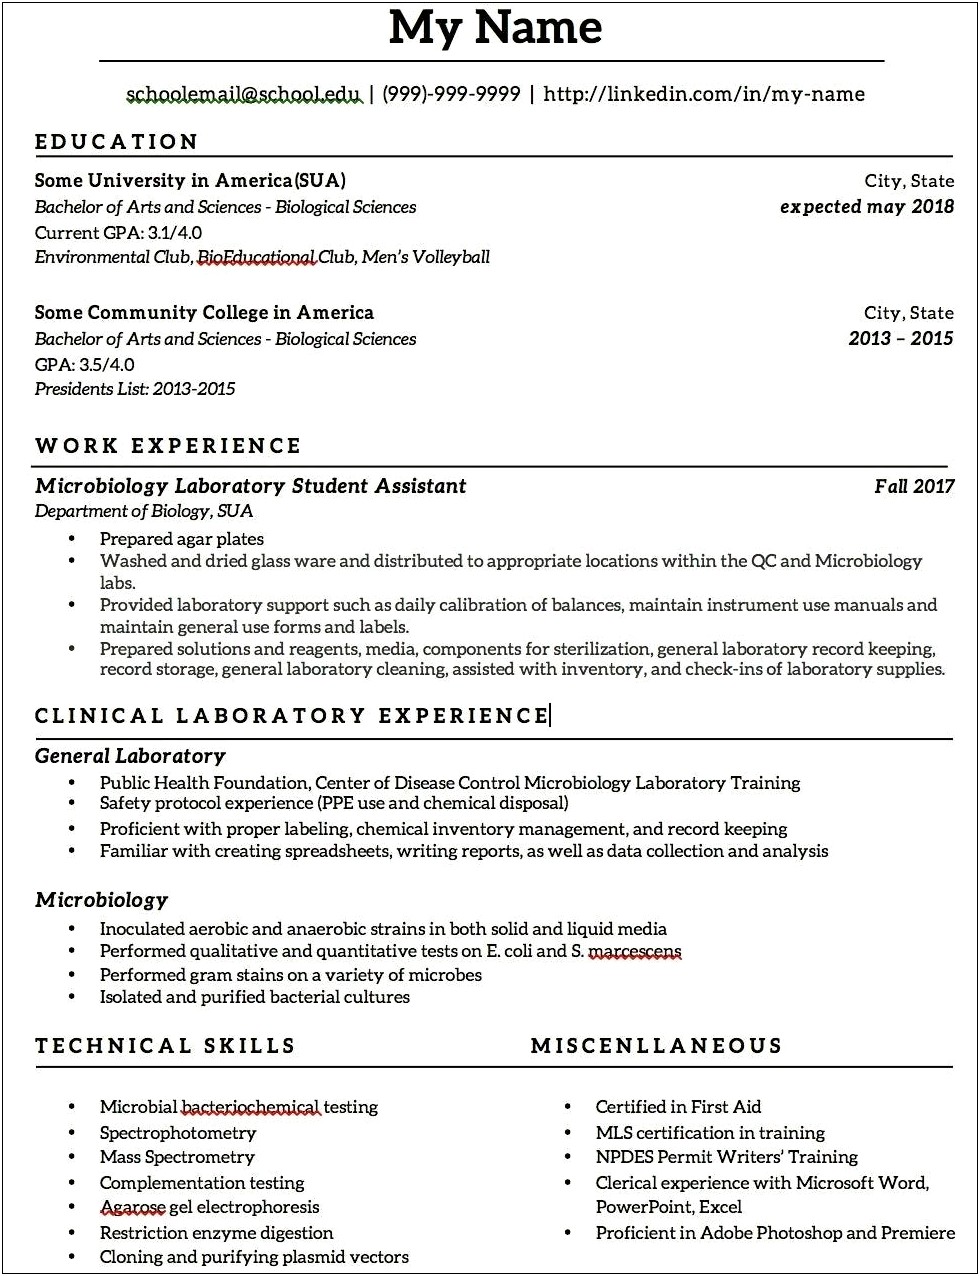 Sample Resume For Entry Level Lab Technician